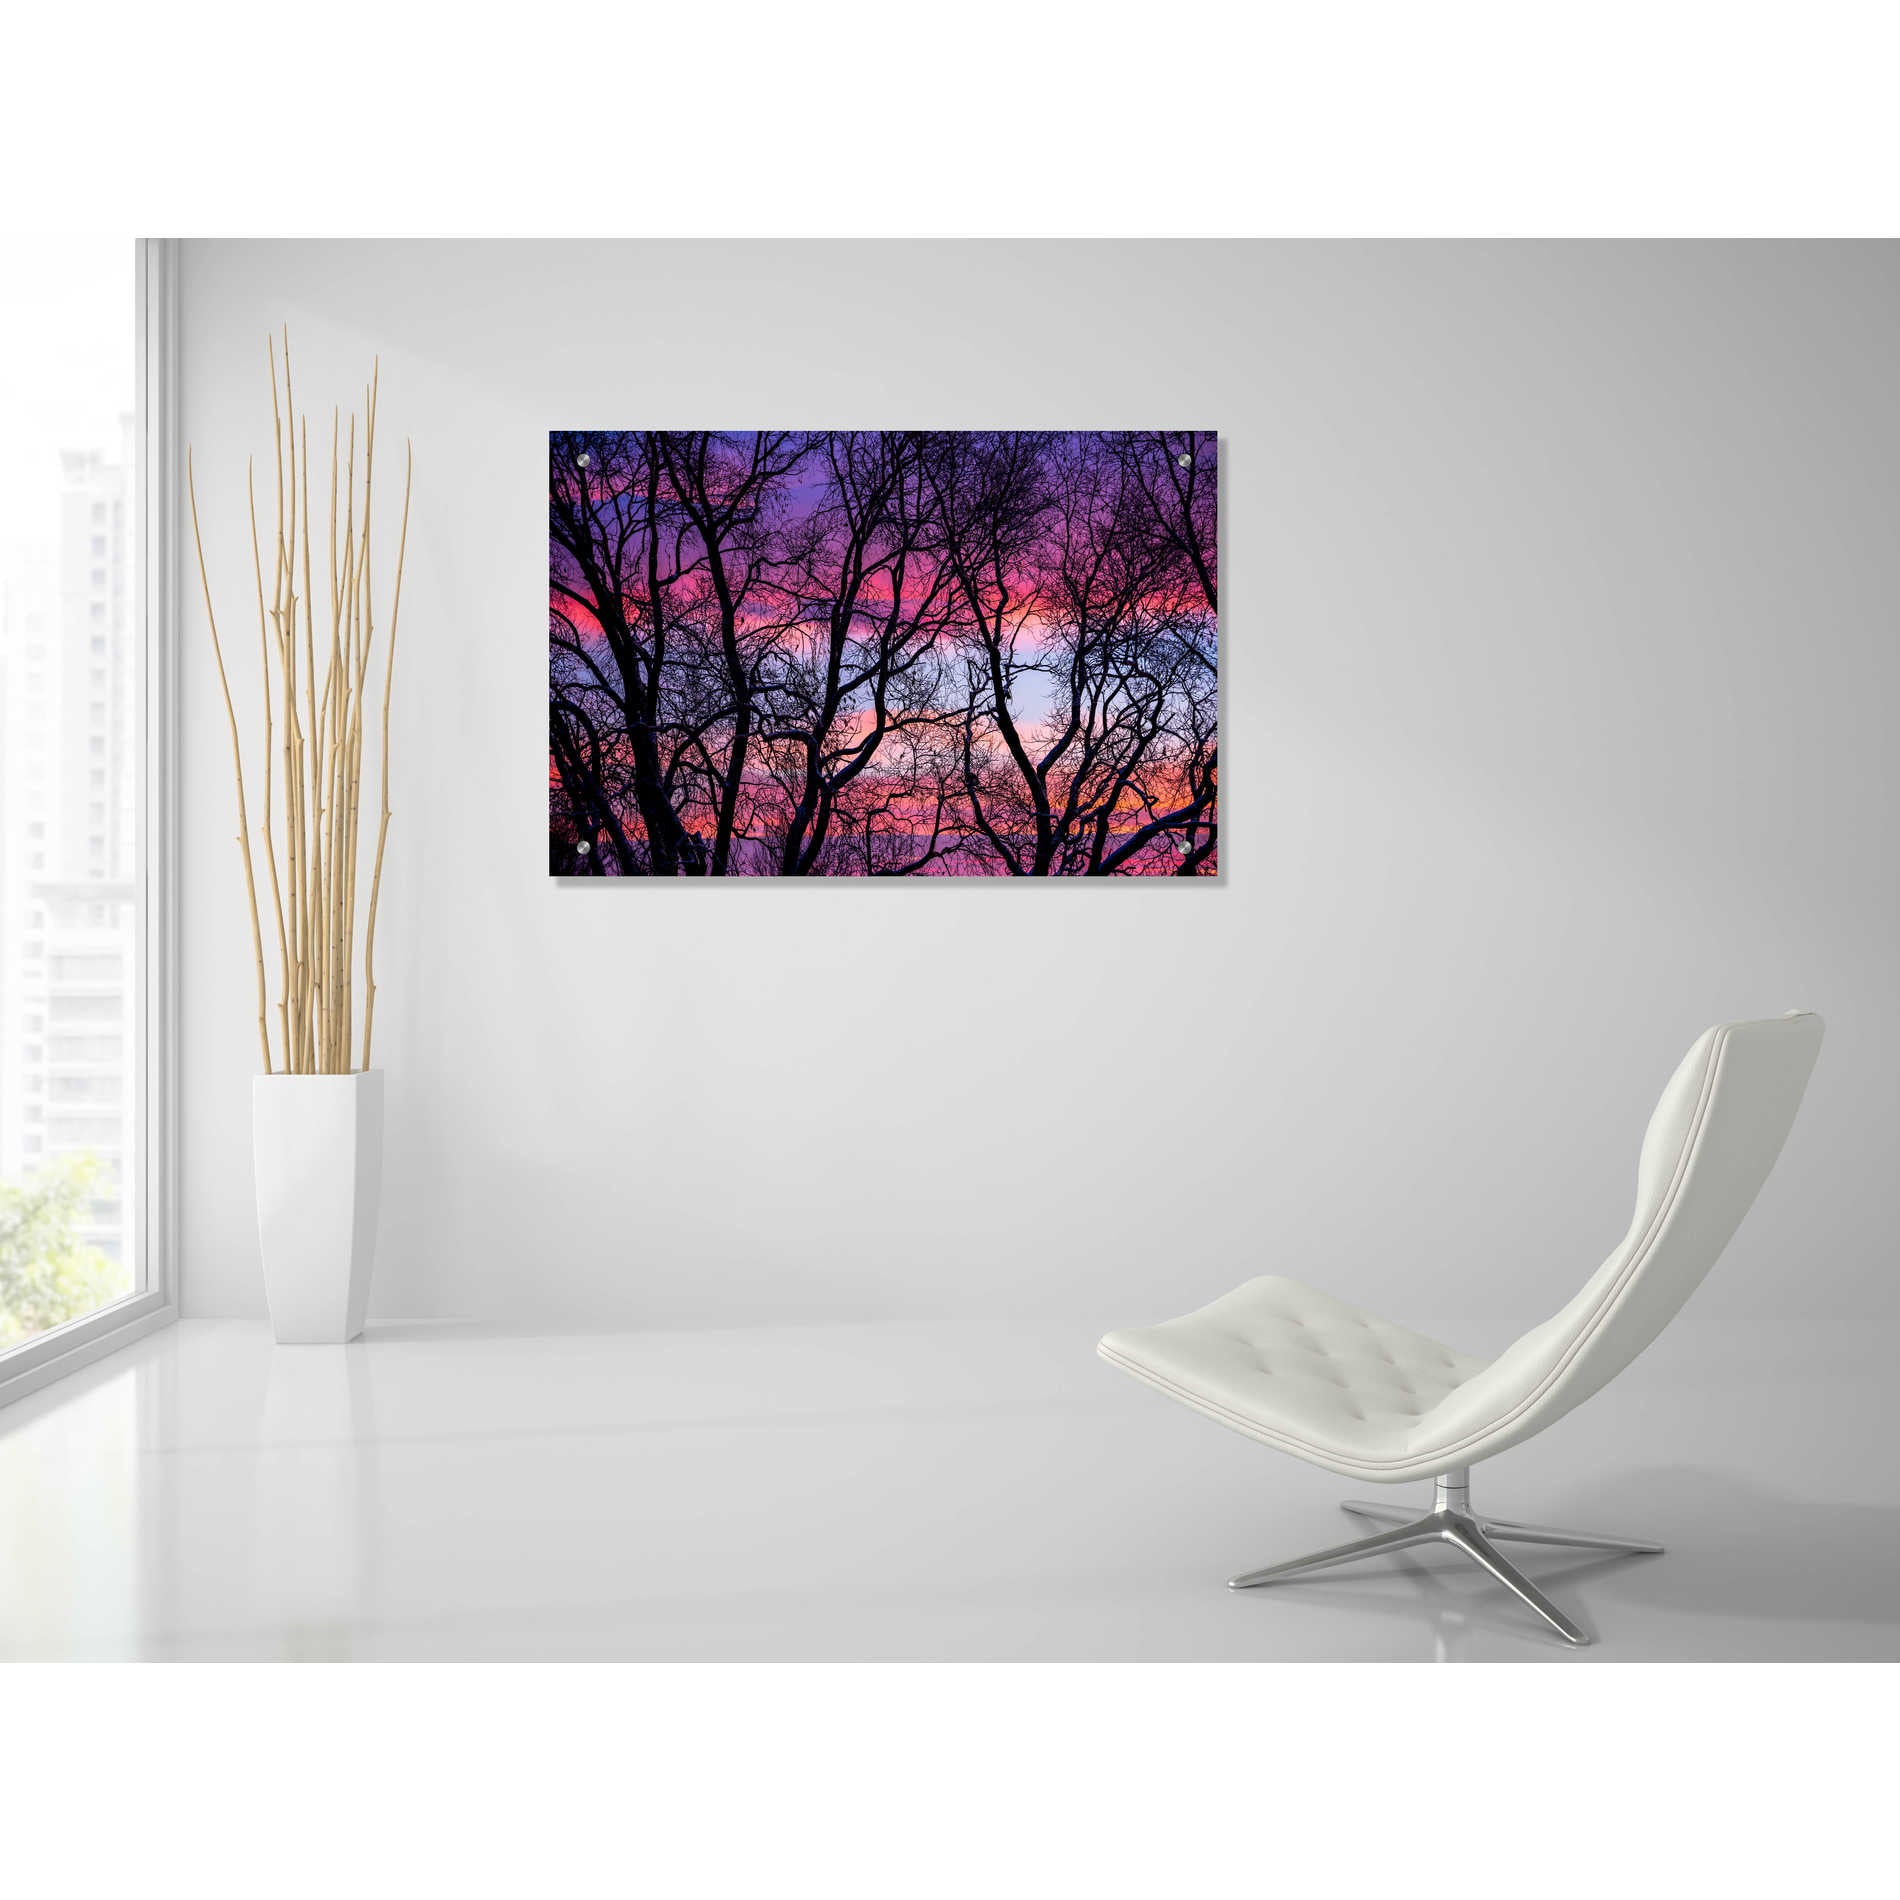 Epic Art 'Sunrise in the Trees' by Darren White, Acrylic Glass Wall Art,36x24